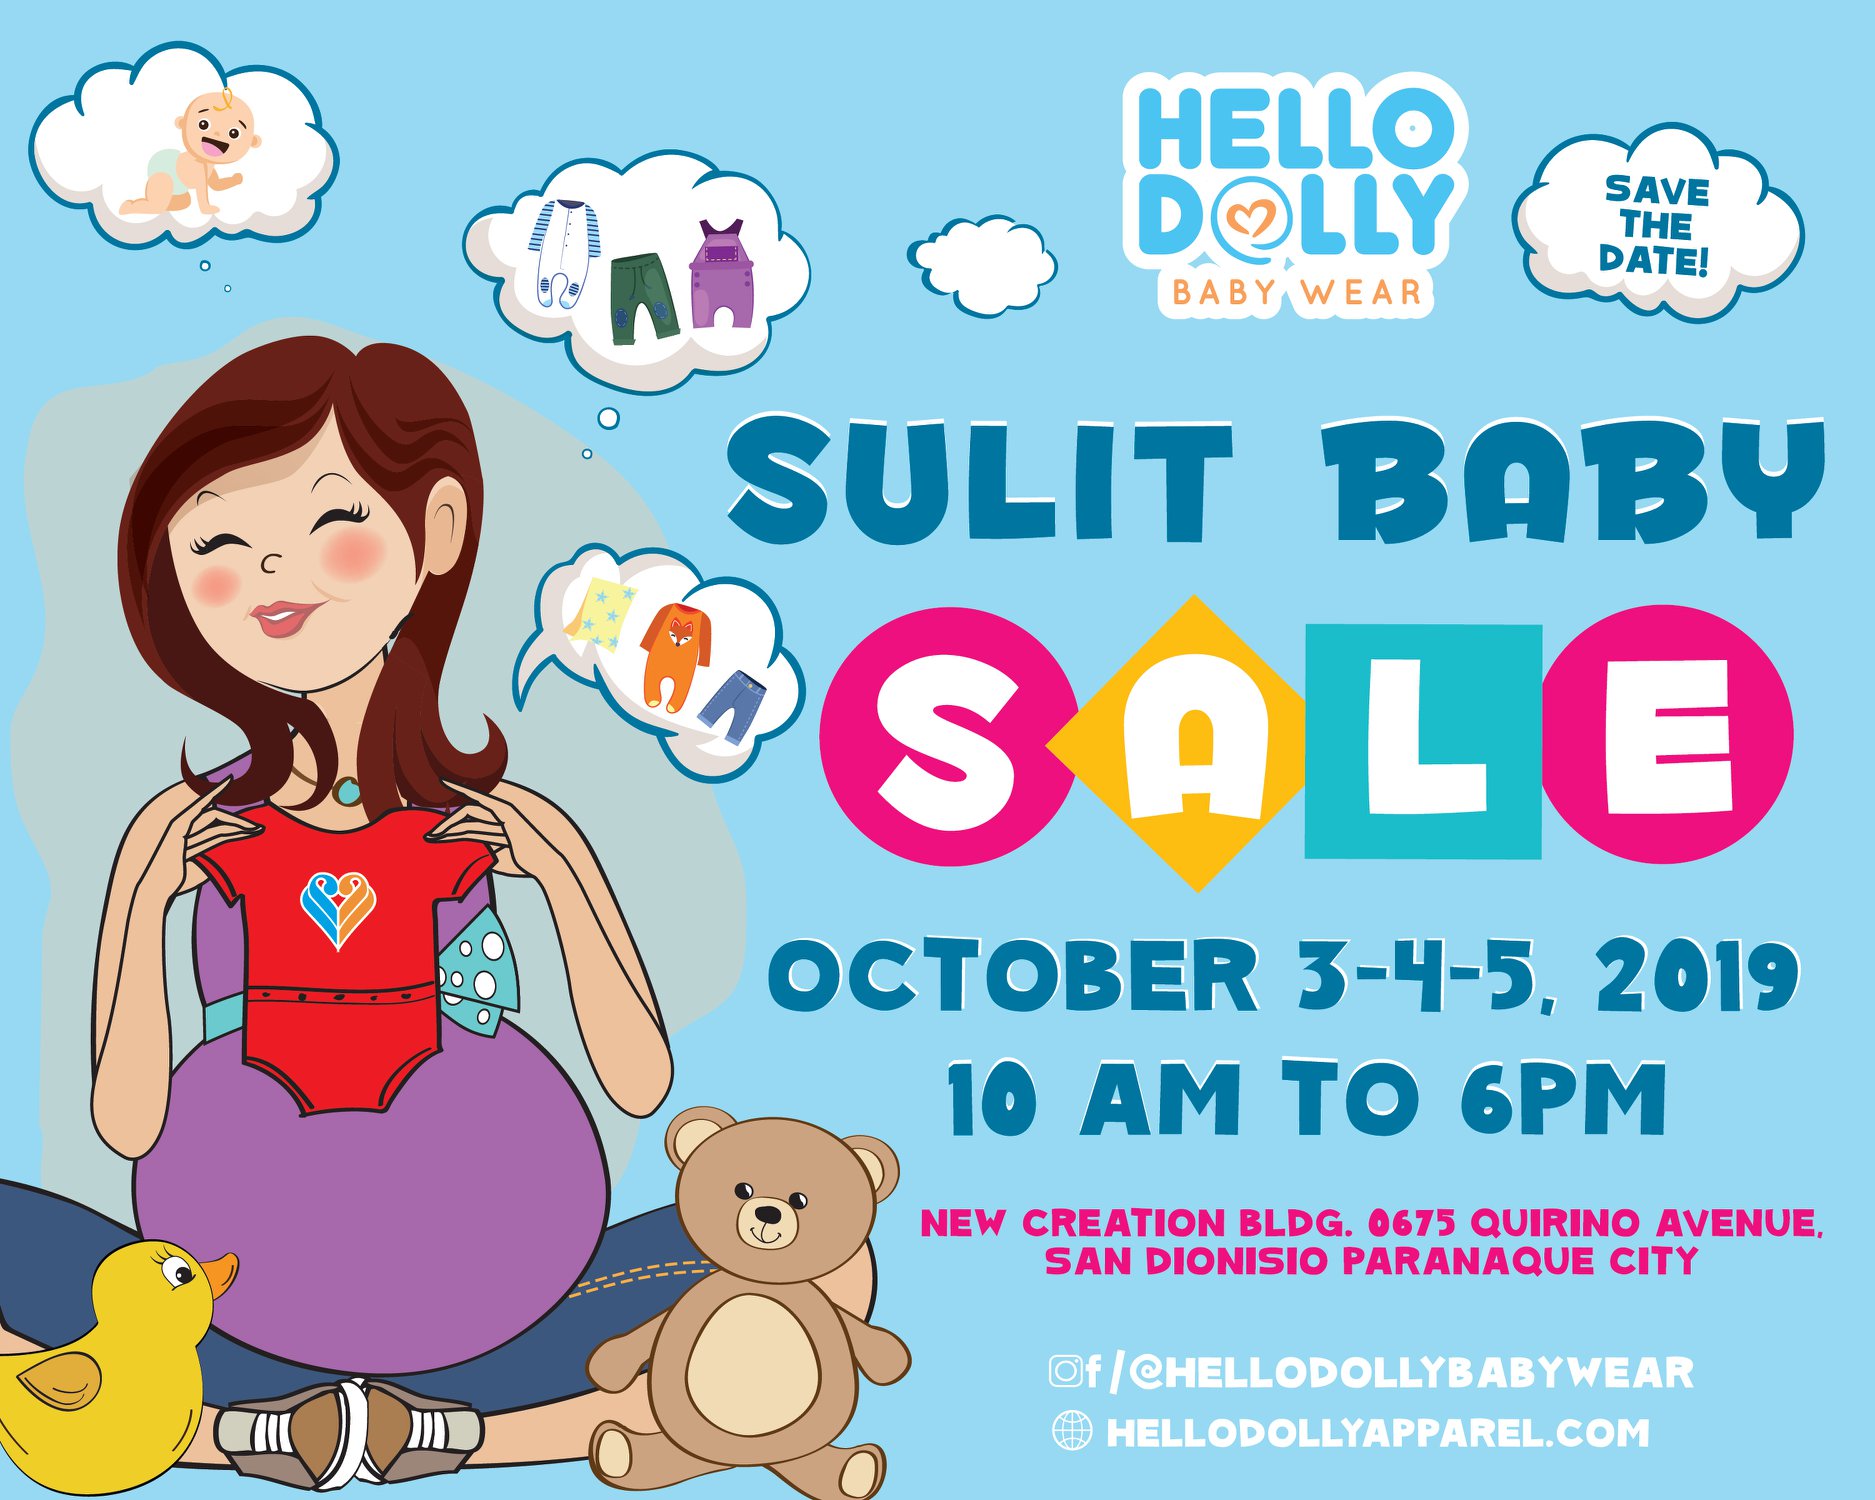 Hello Dolly's SULIT BABY SALE